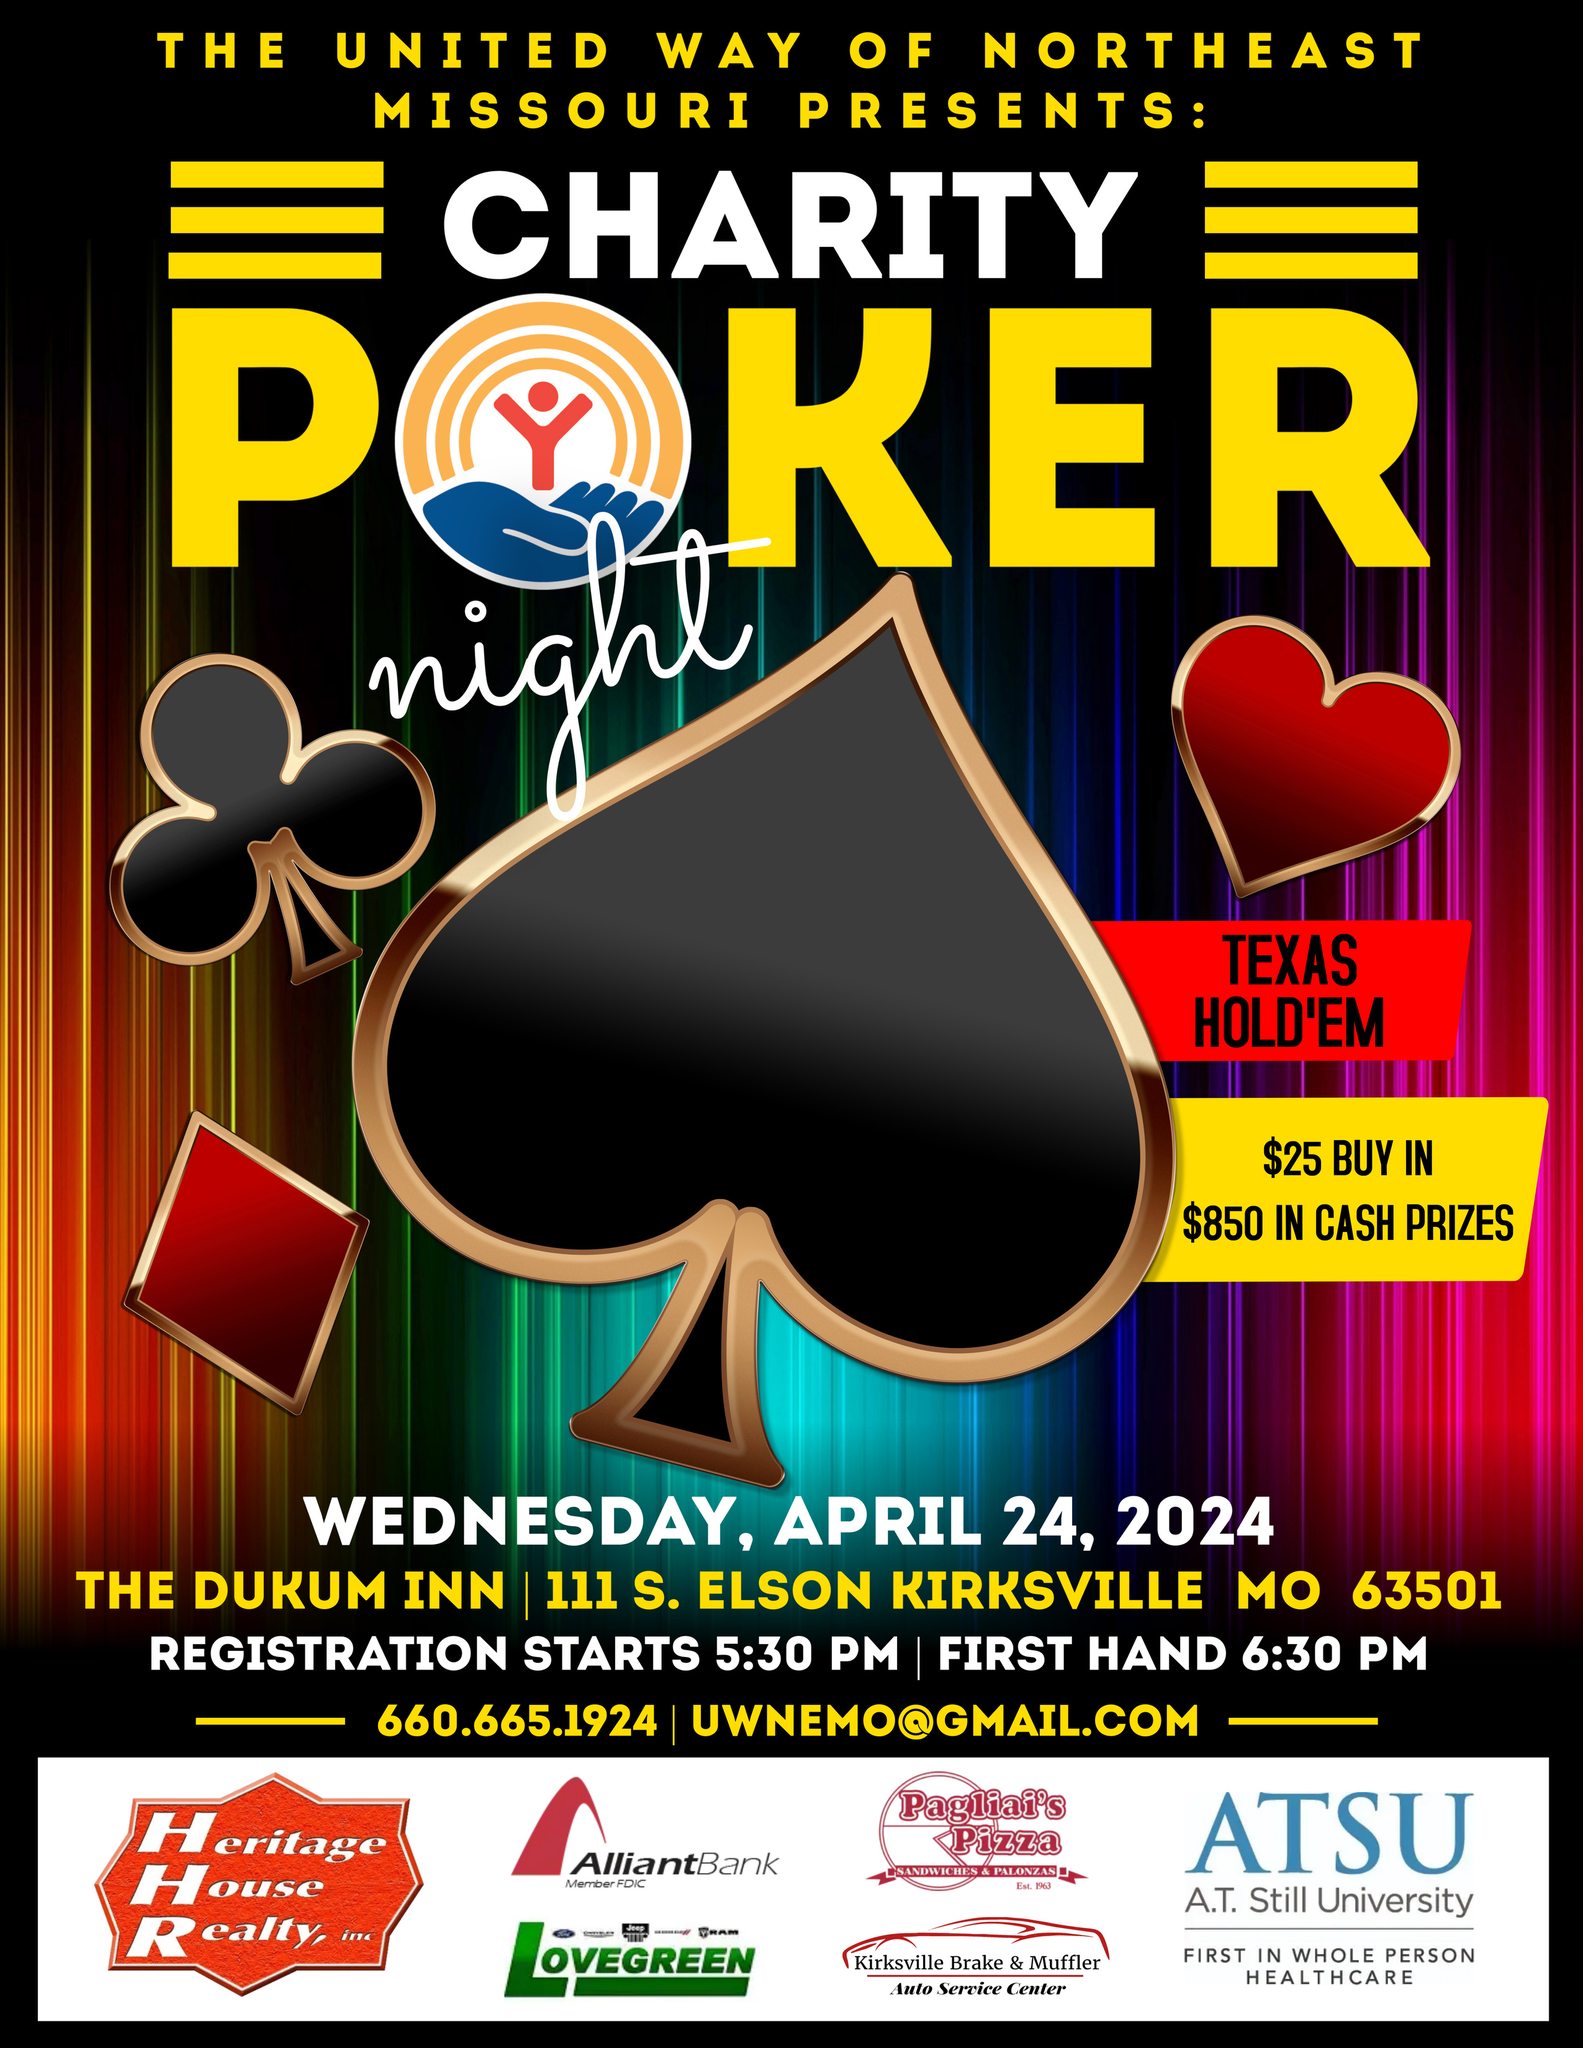 Check more about United Way Poker Tournament